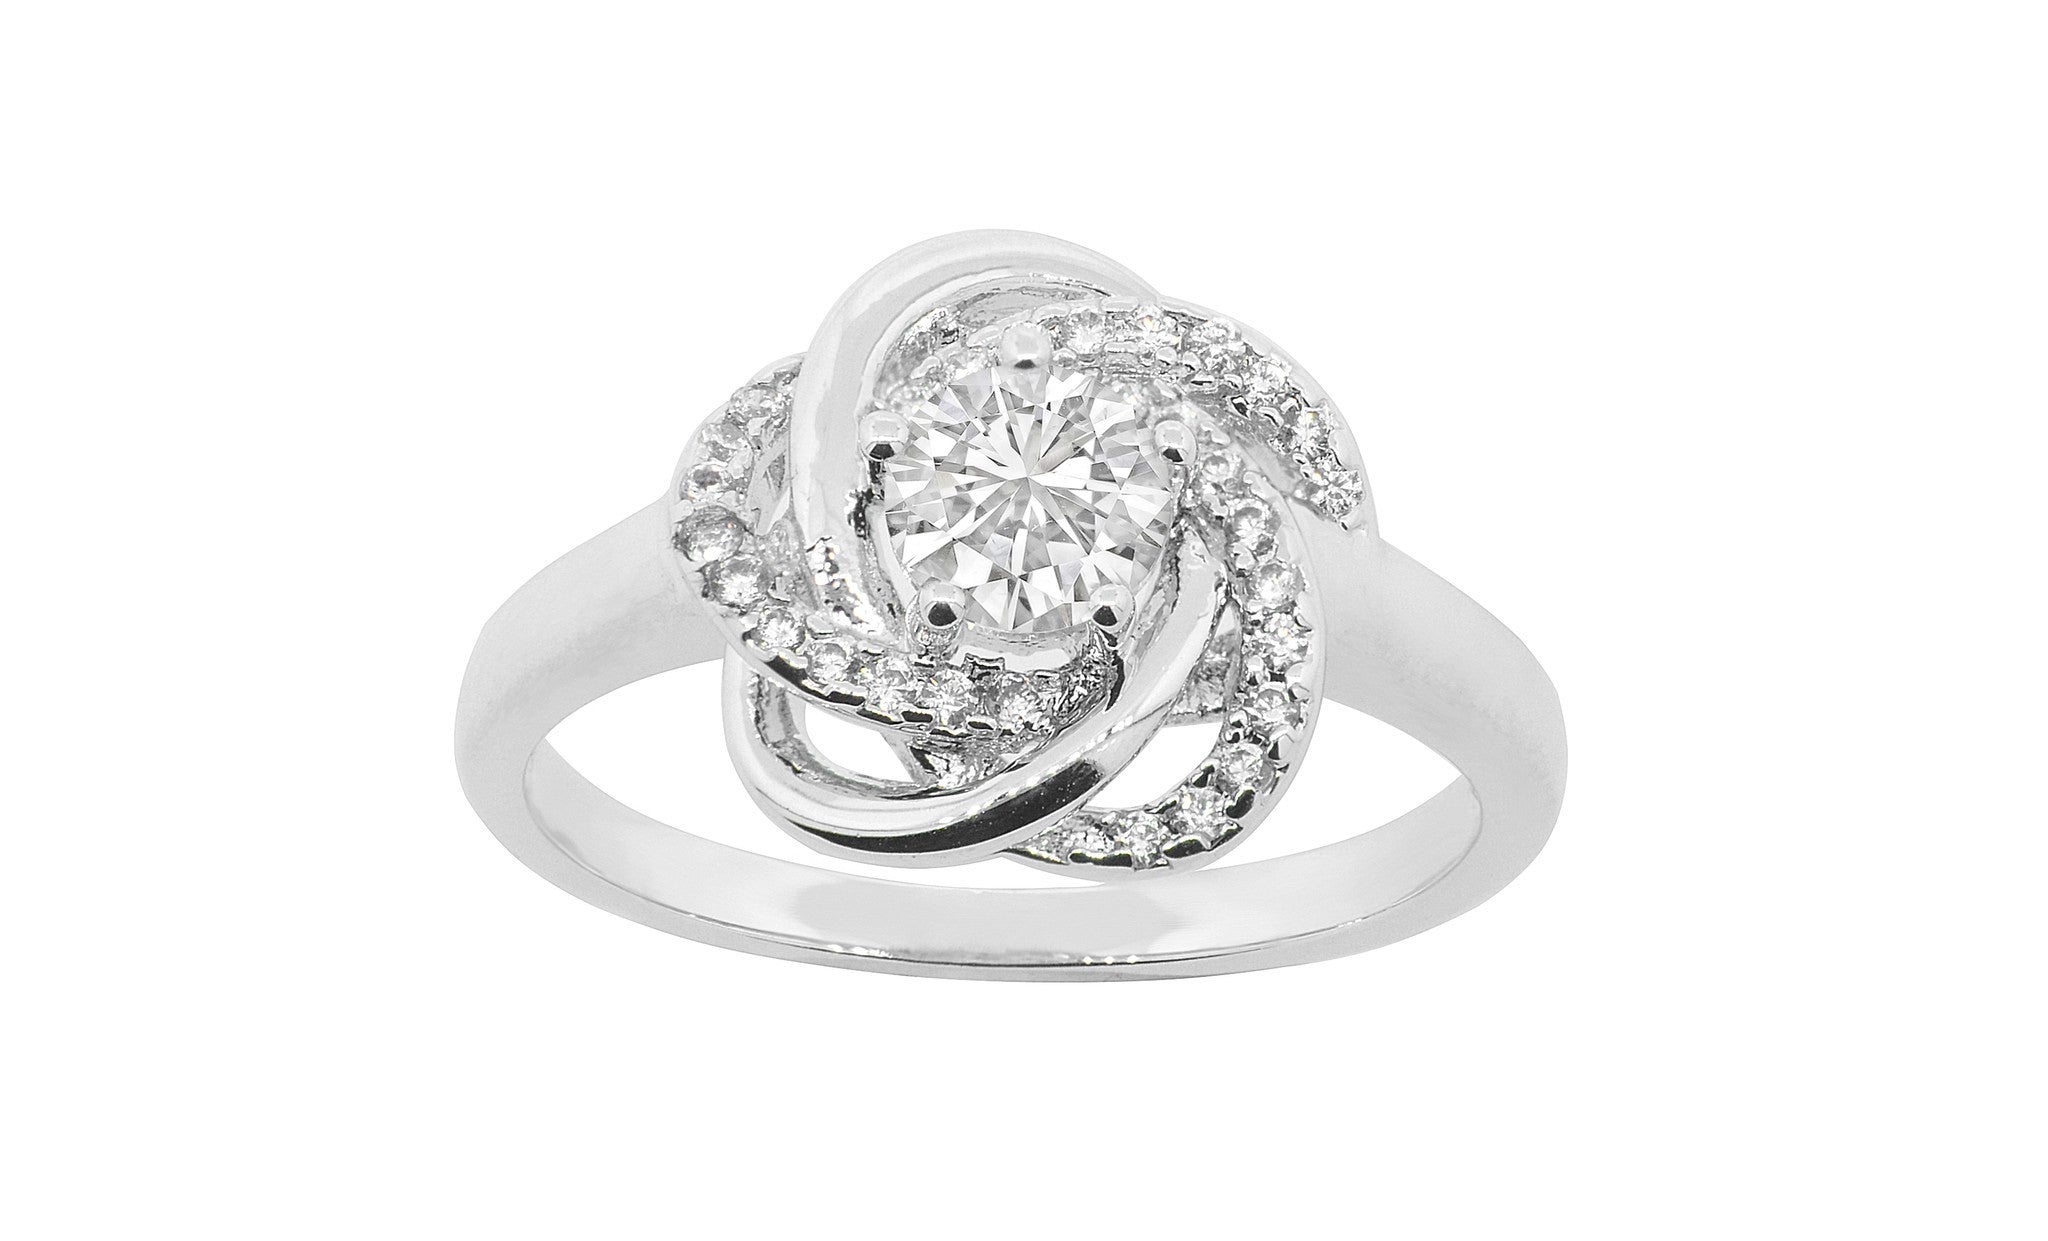 Jewelry, Rings, Silver Rings - Stella "Cosmic" 18k White Gold Plated Ring